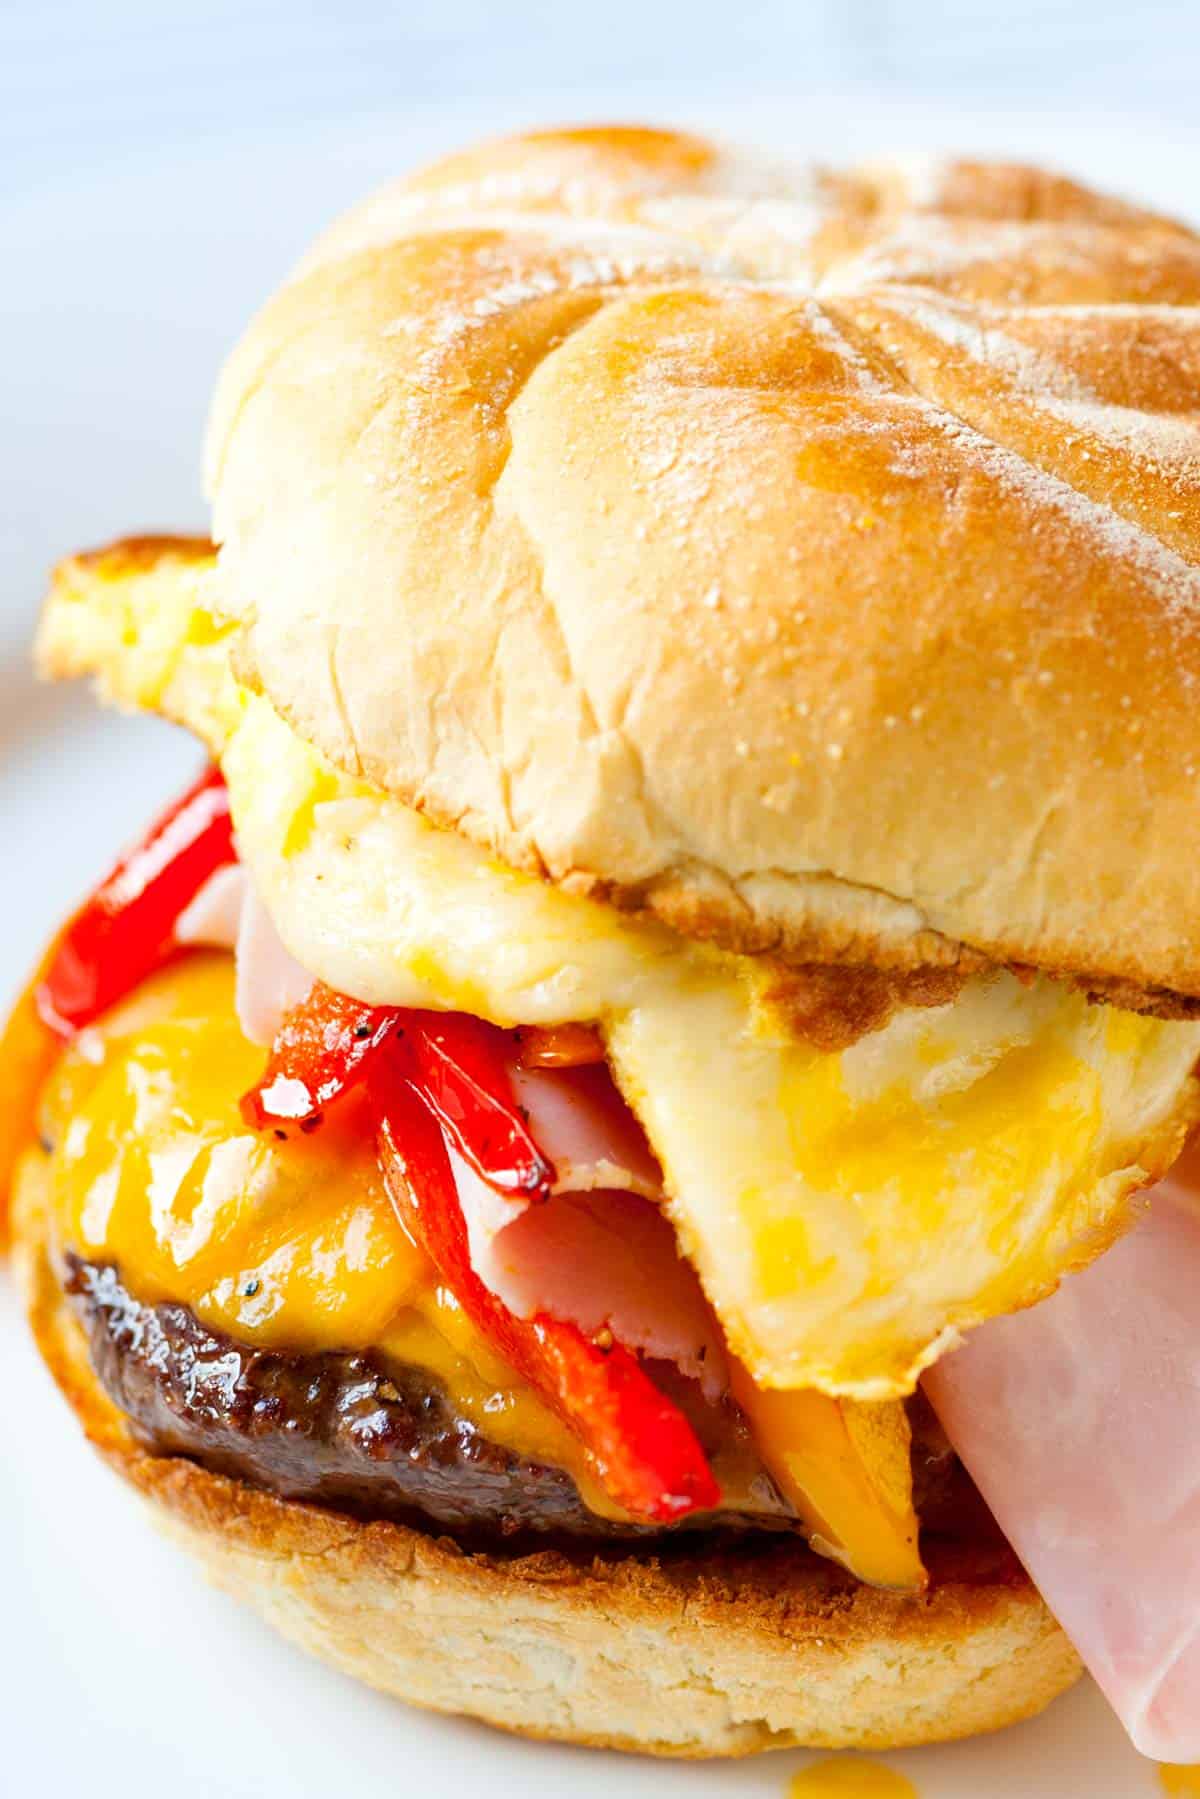 Outrageous Burger Recipe with Egg, Ham and Peppers